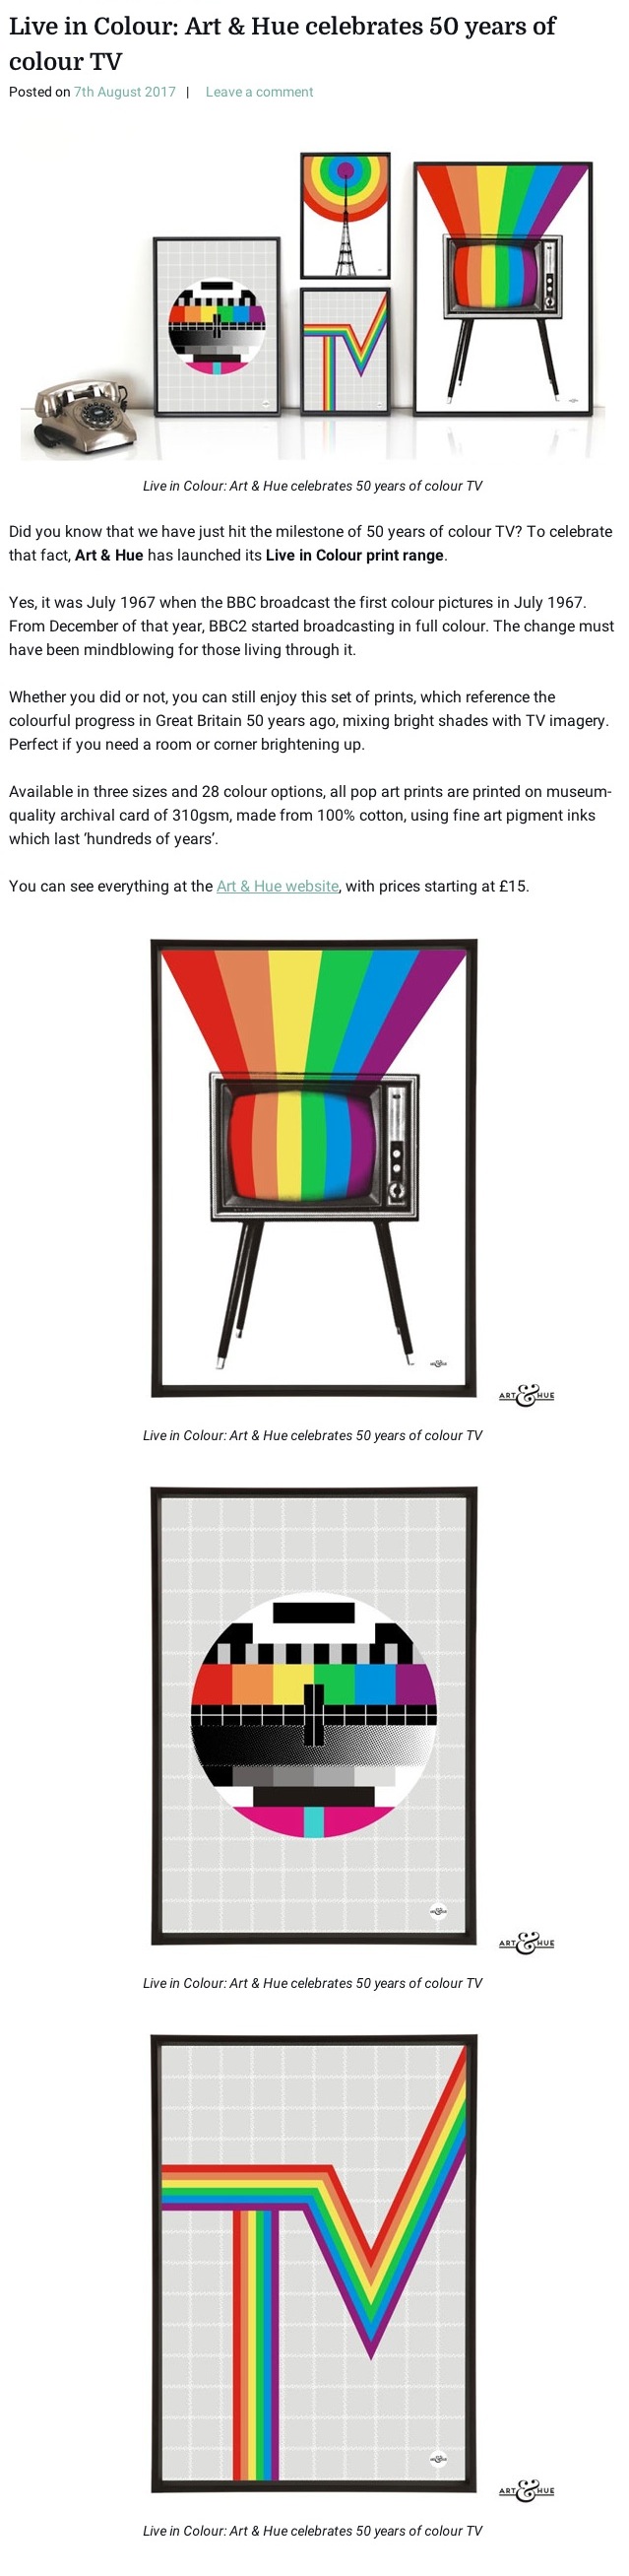 Live in Colour: Art & Hue celebrates 50 years of colour TV | Retro to Go